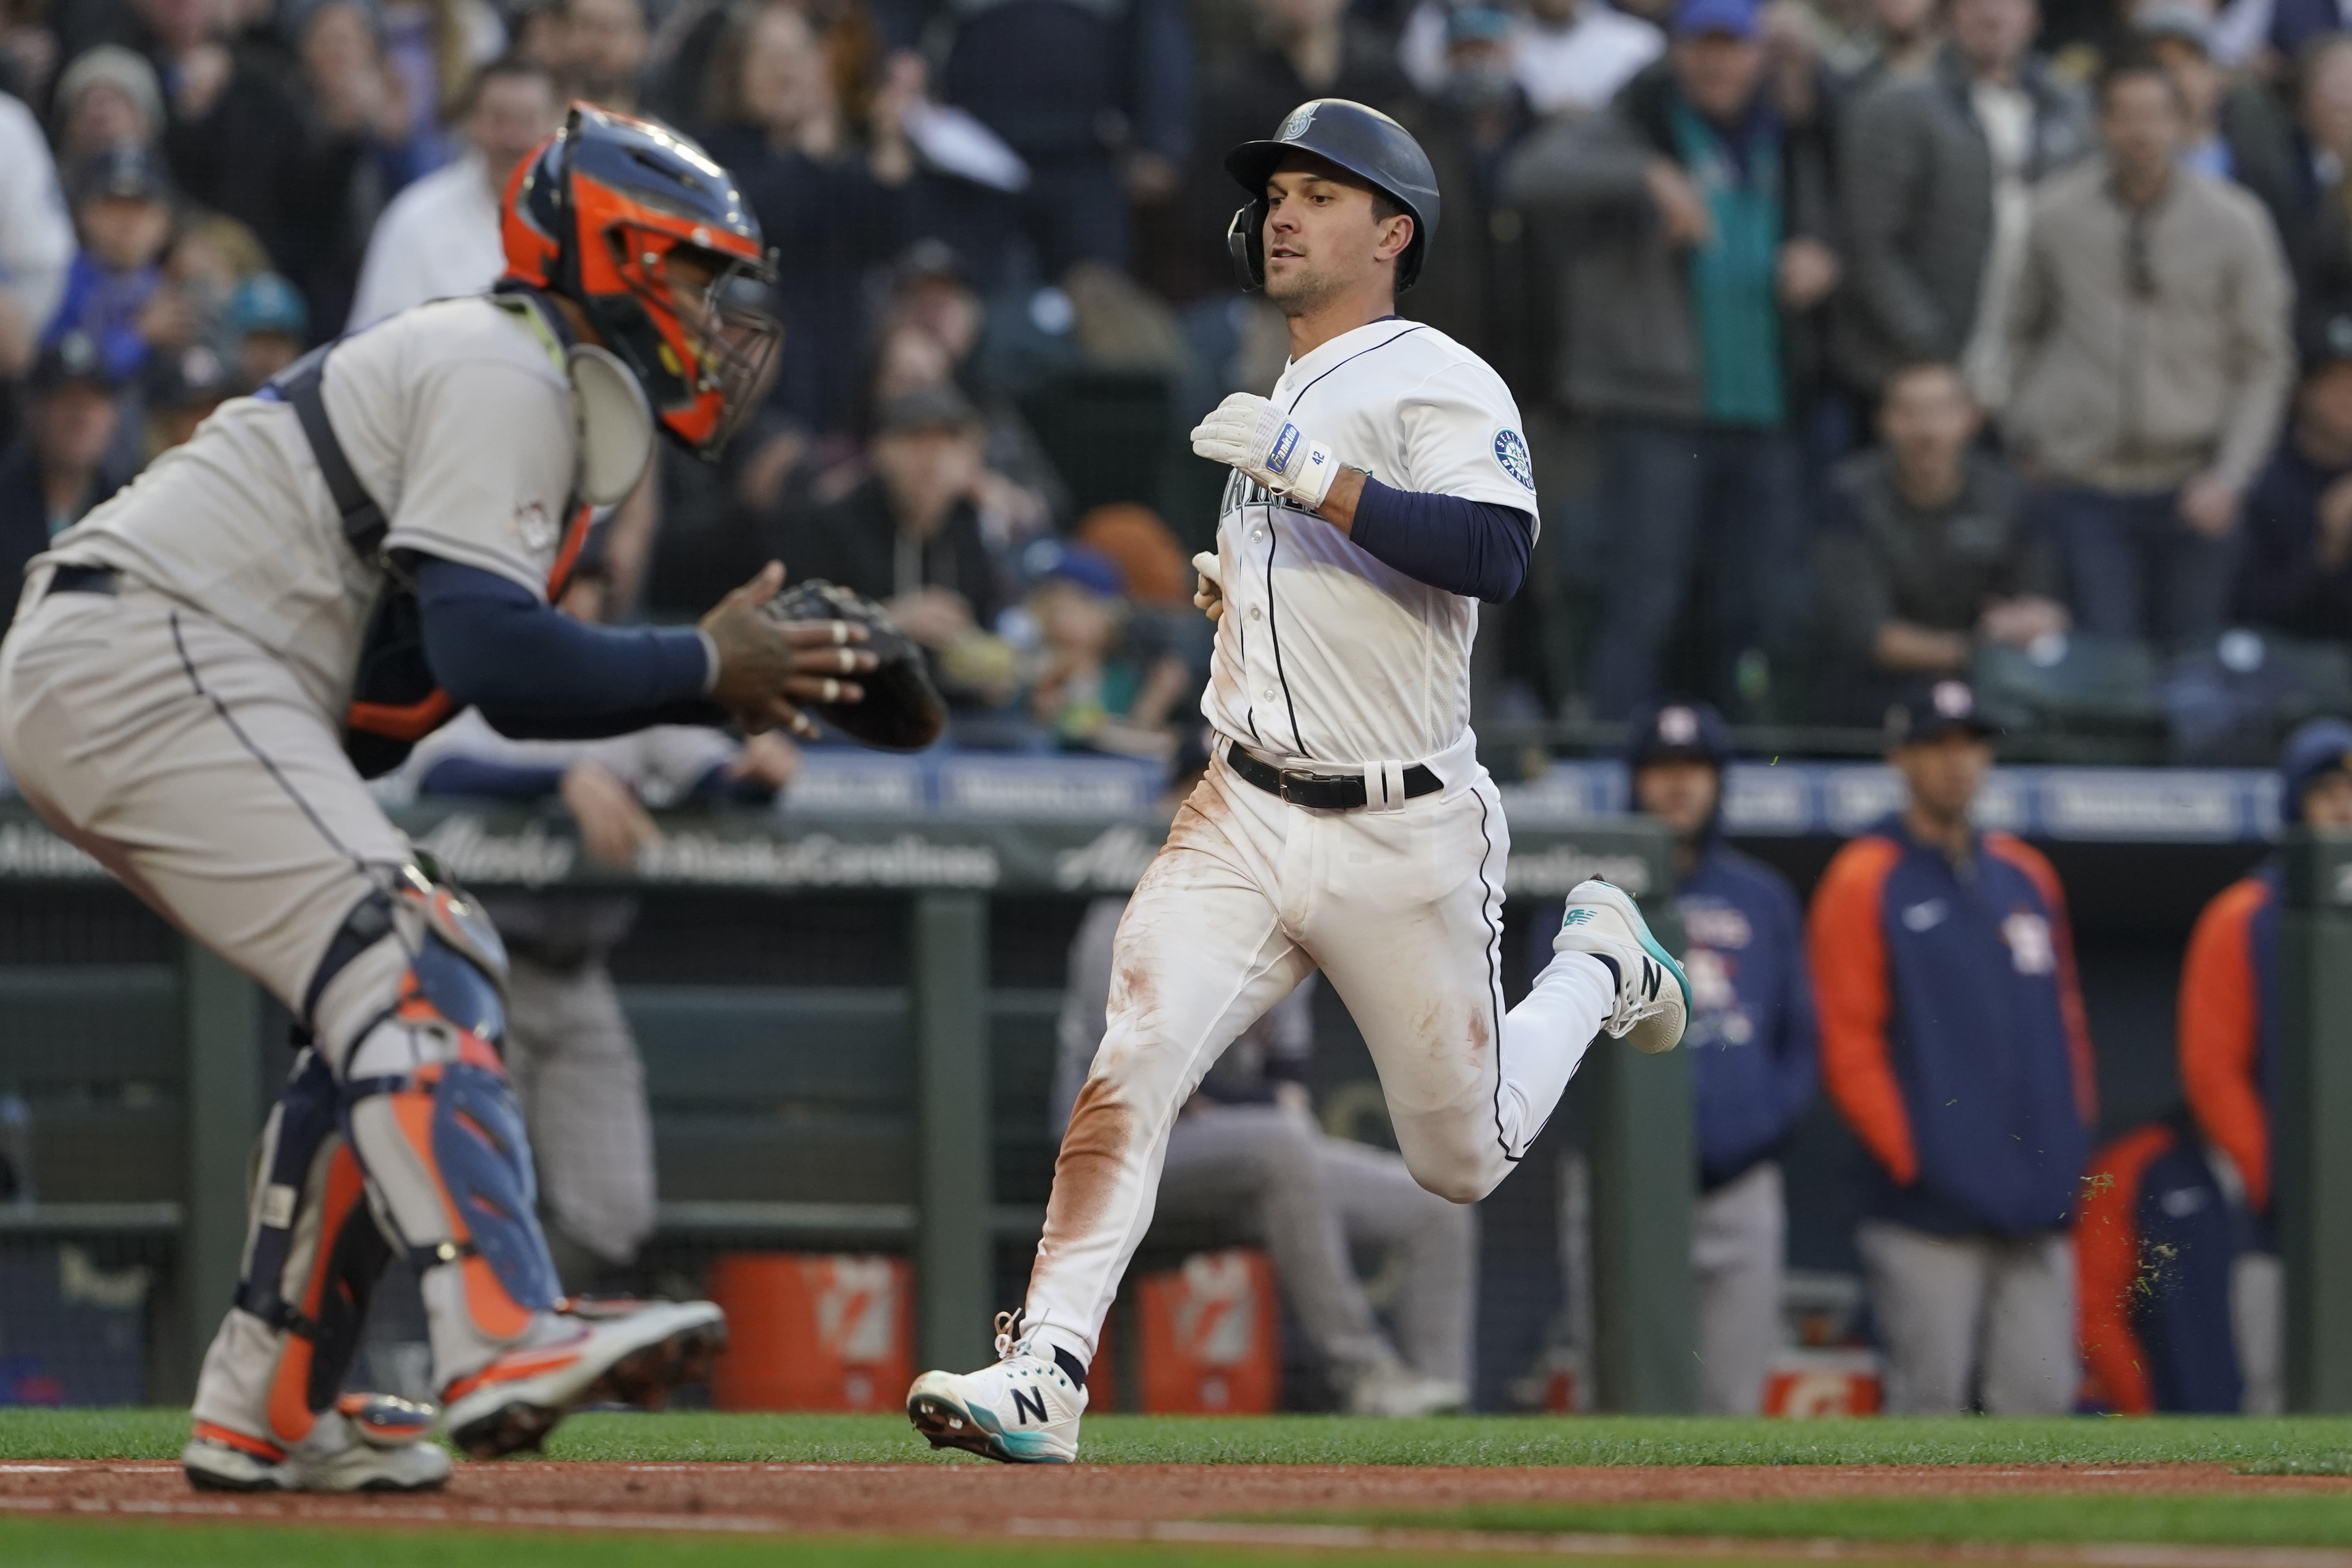 Frazier, Gonzales lead M's past Astros 11-1 in home opener - The